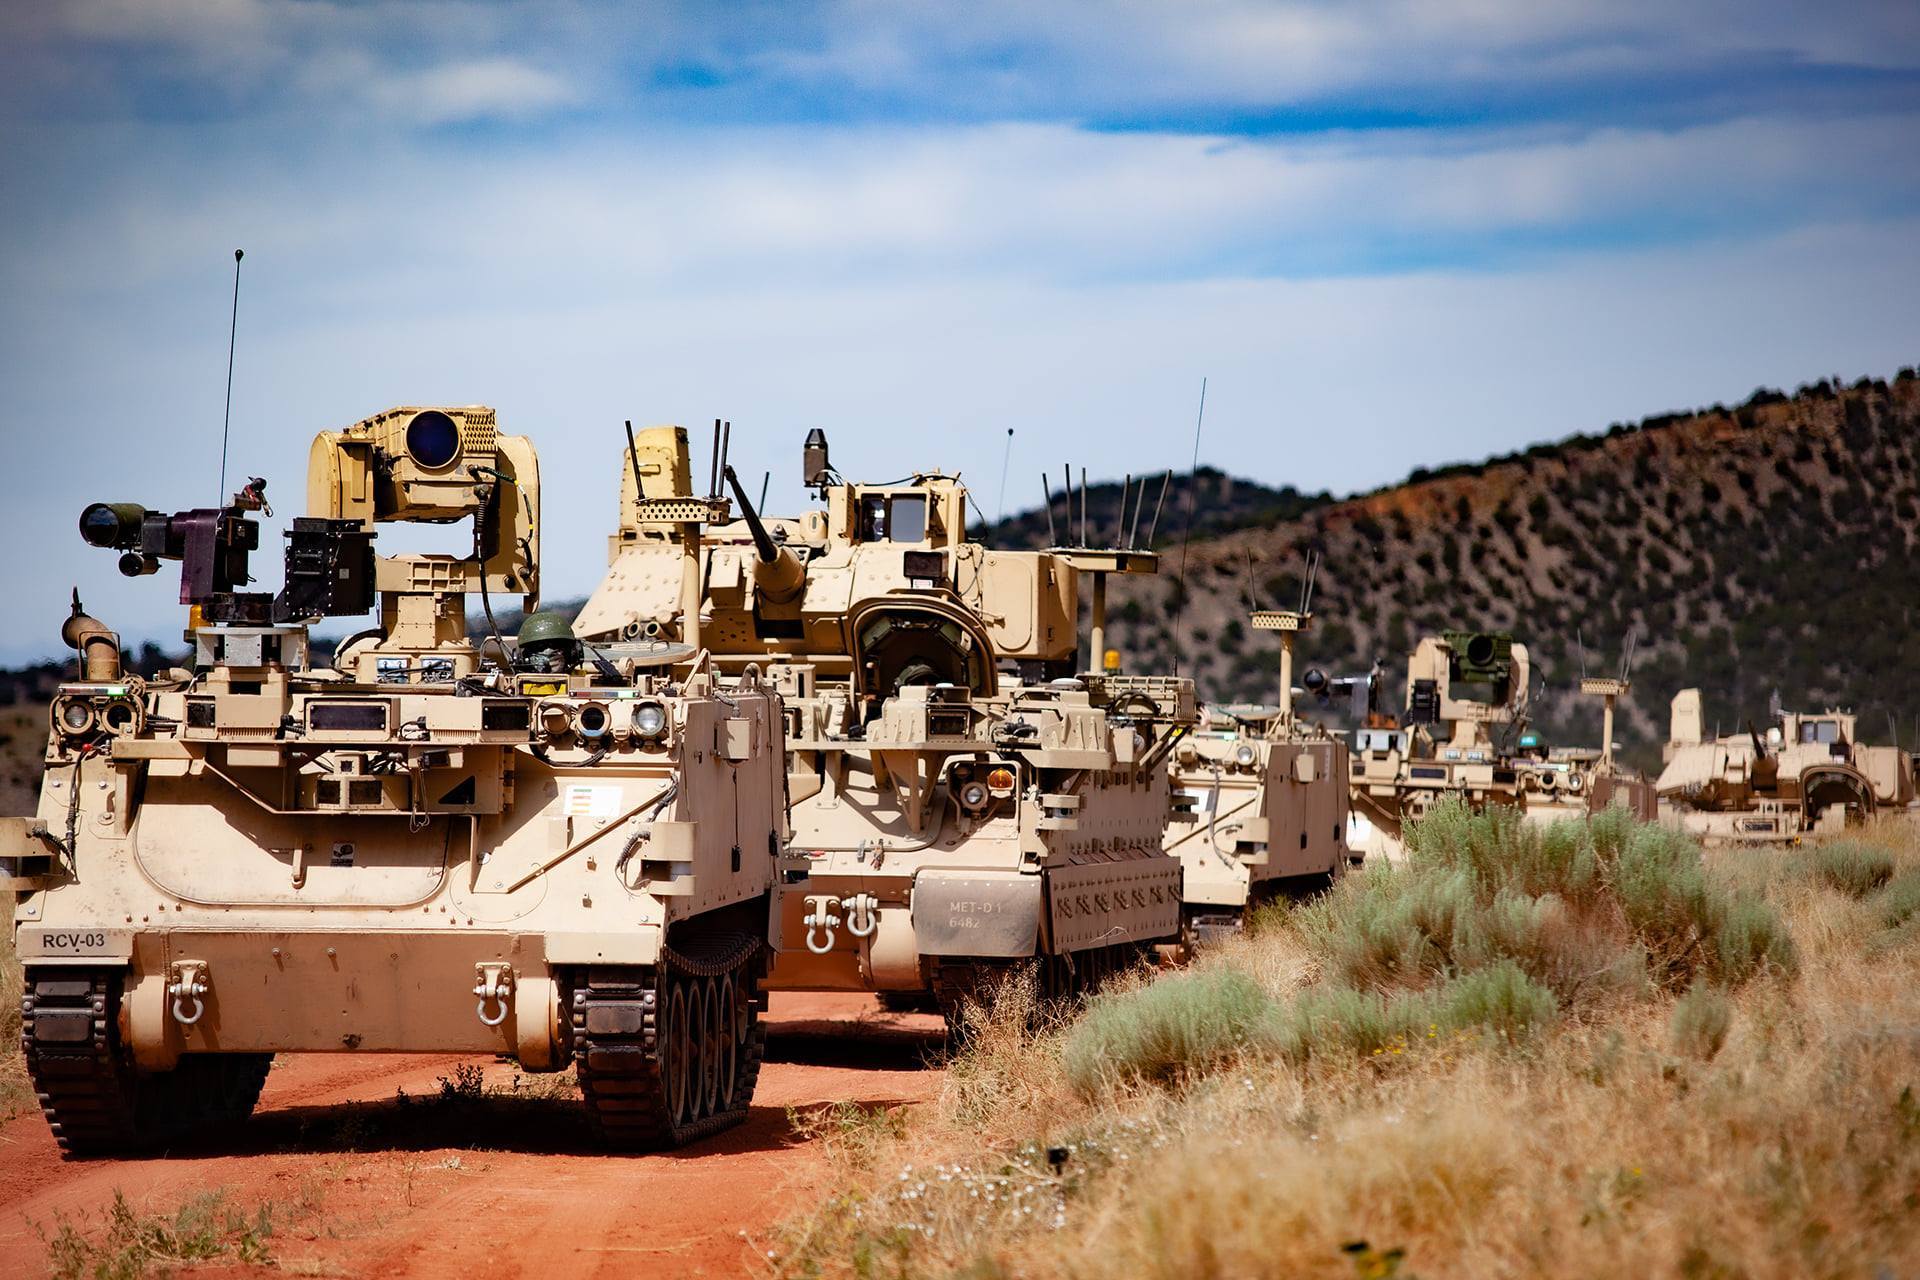 The story behind the Army's new tank-like vehicle